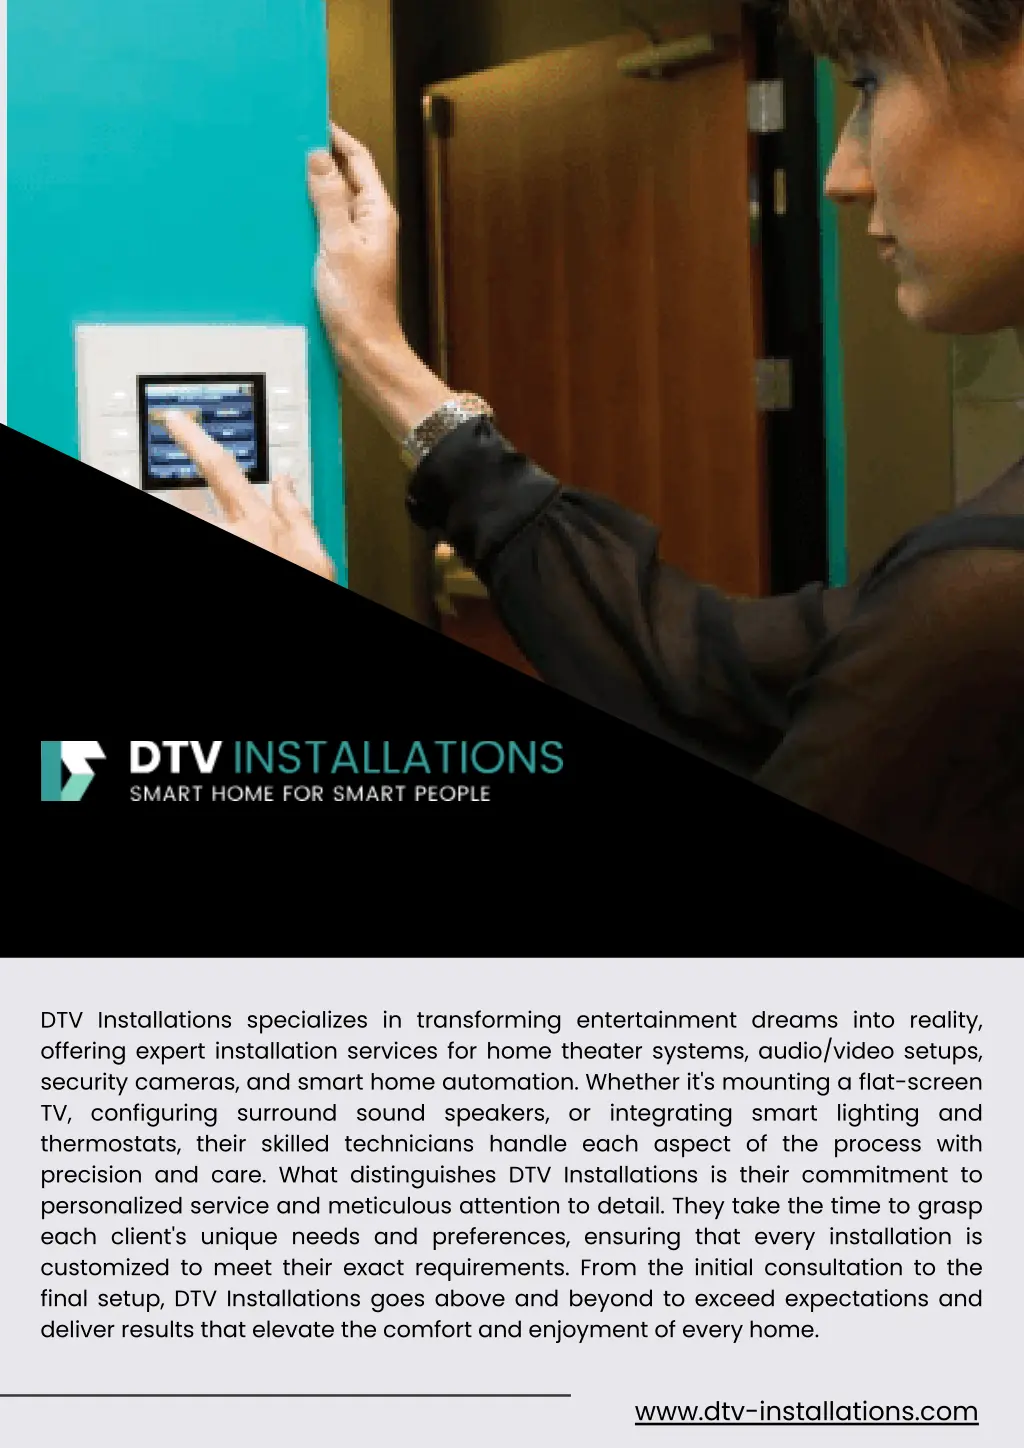 dtv installations specializes in transforming